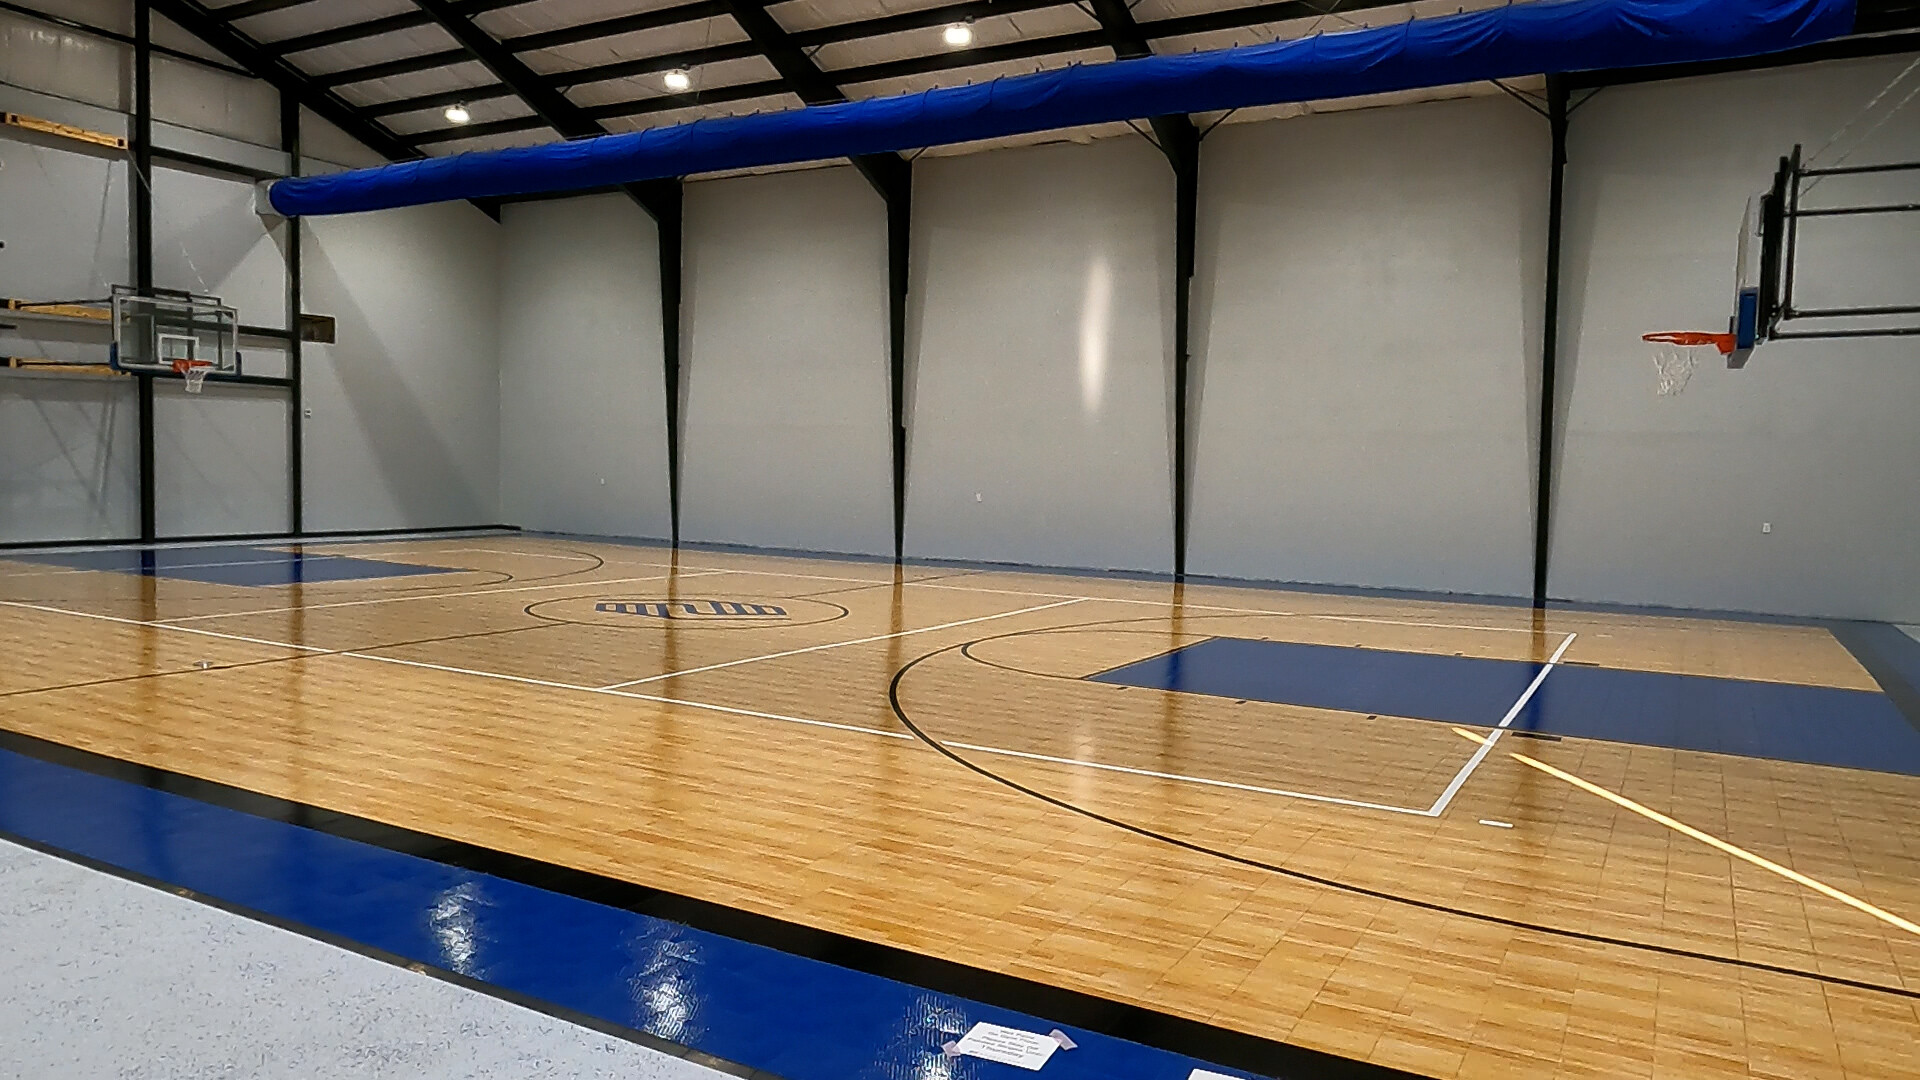 Completed new gym at the Boys and Girls Club of Kingsville